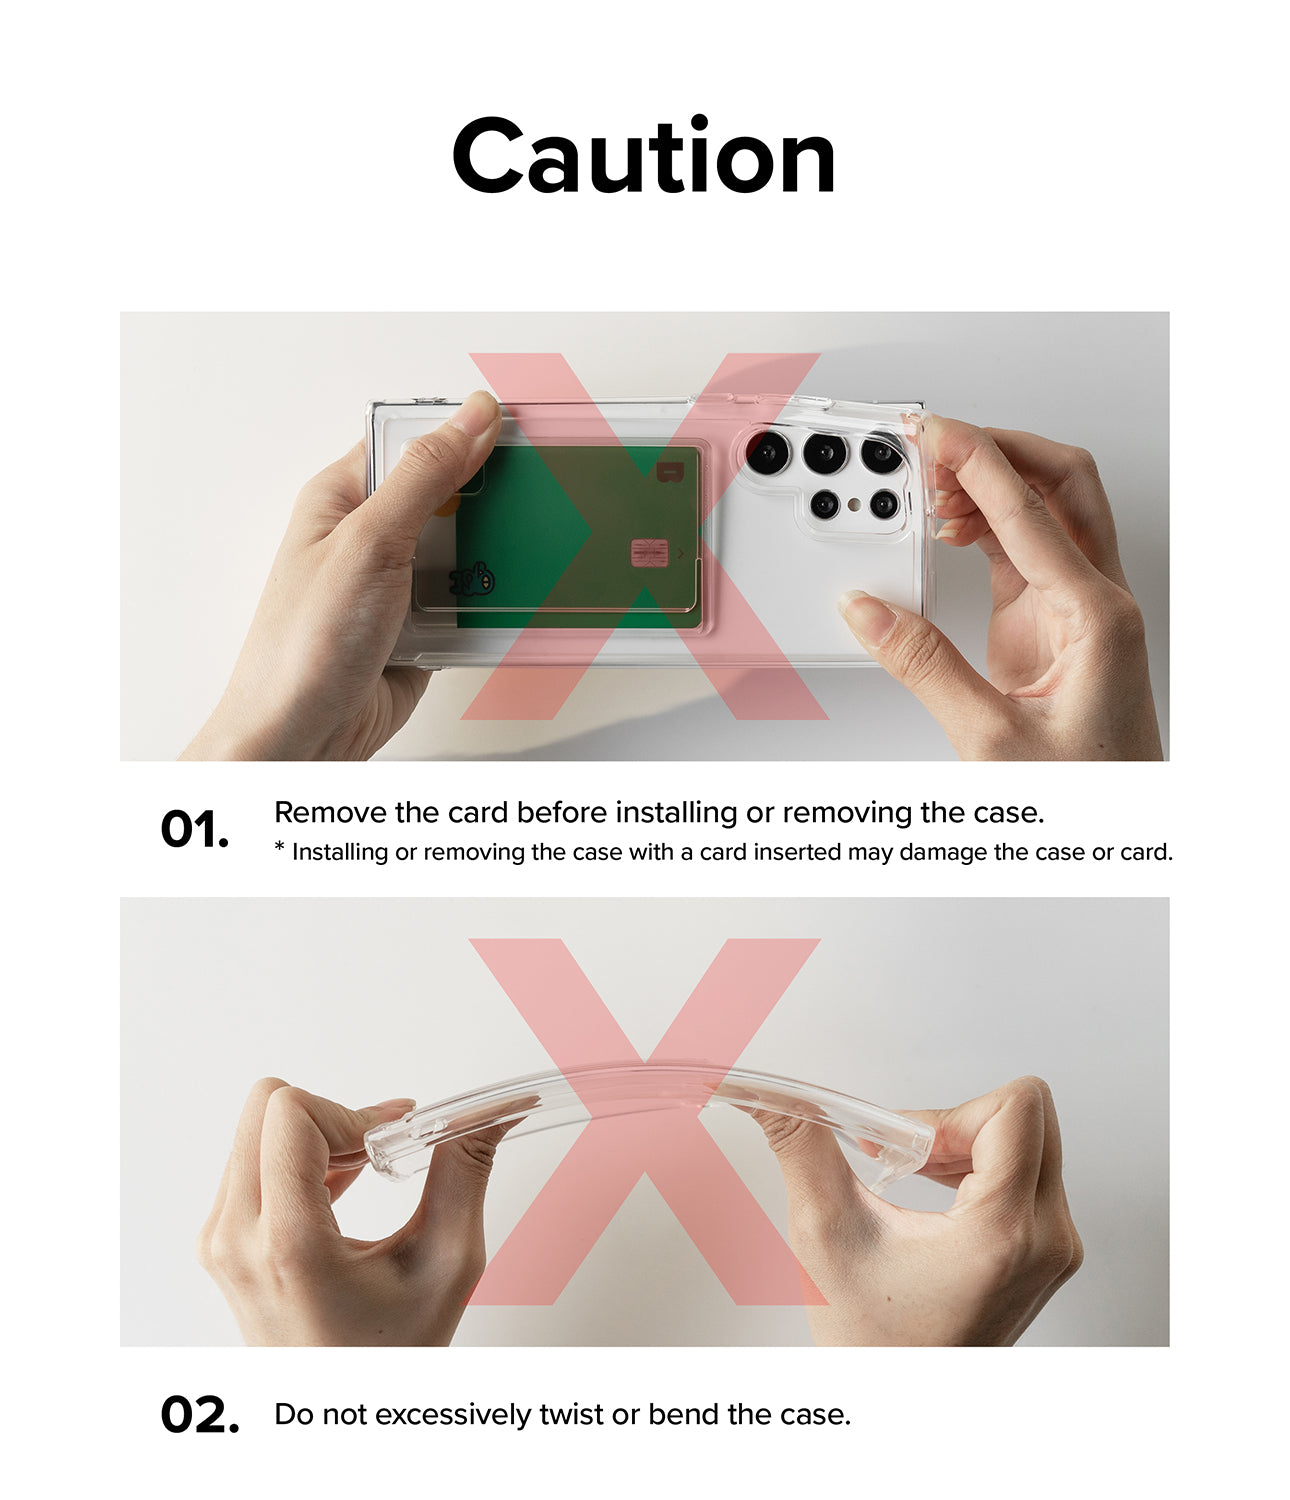 remove the card before installing or removing the case, do not excessively twist or bend the case